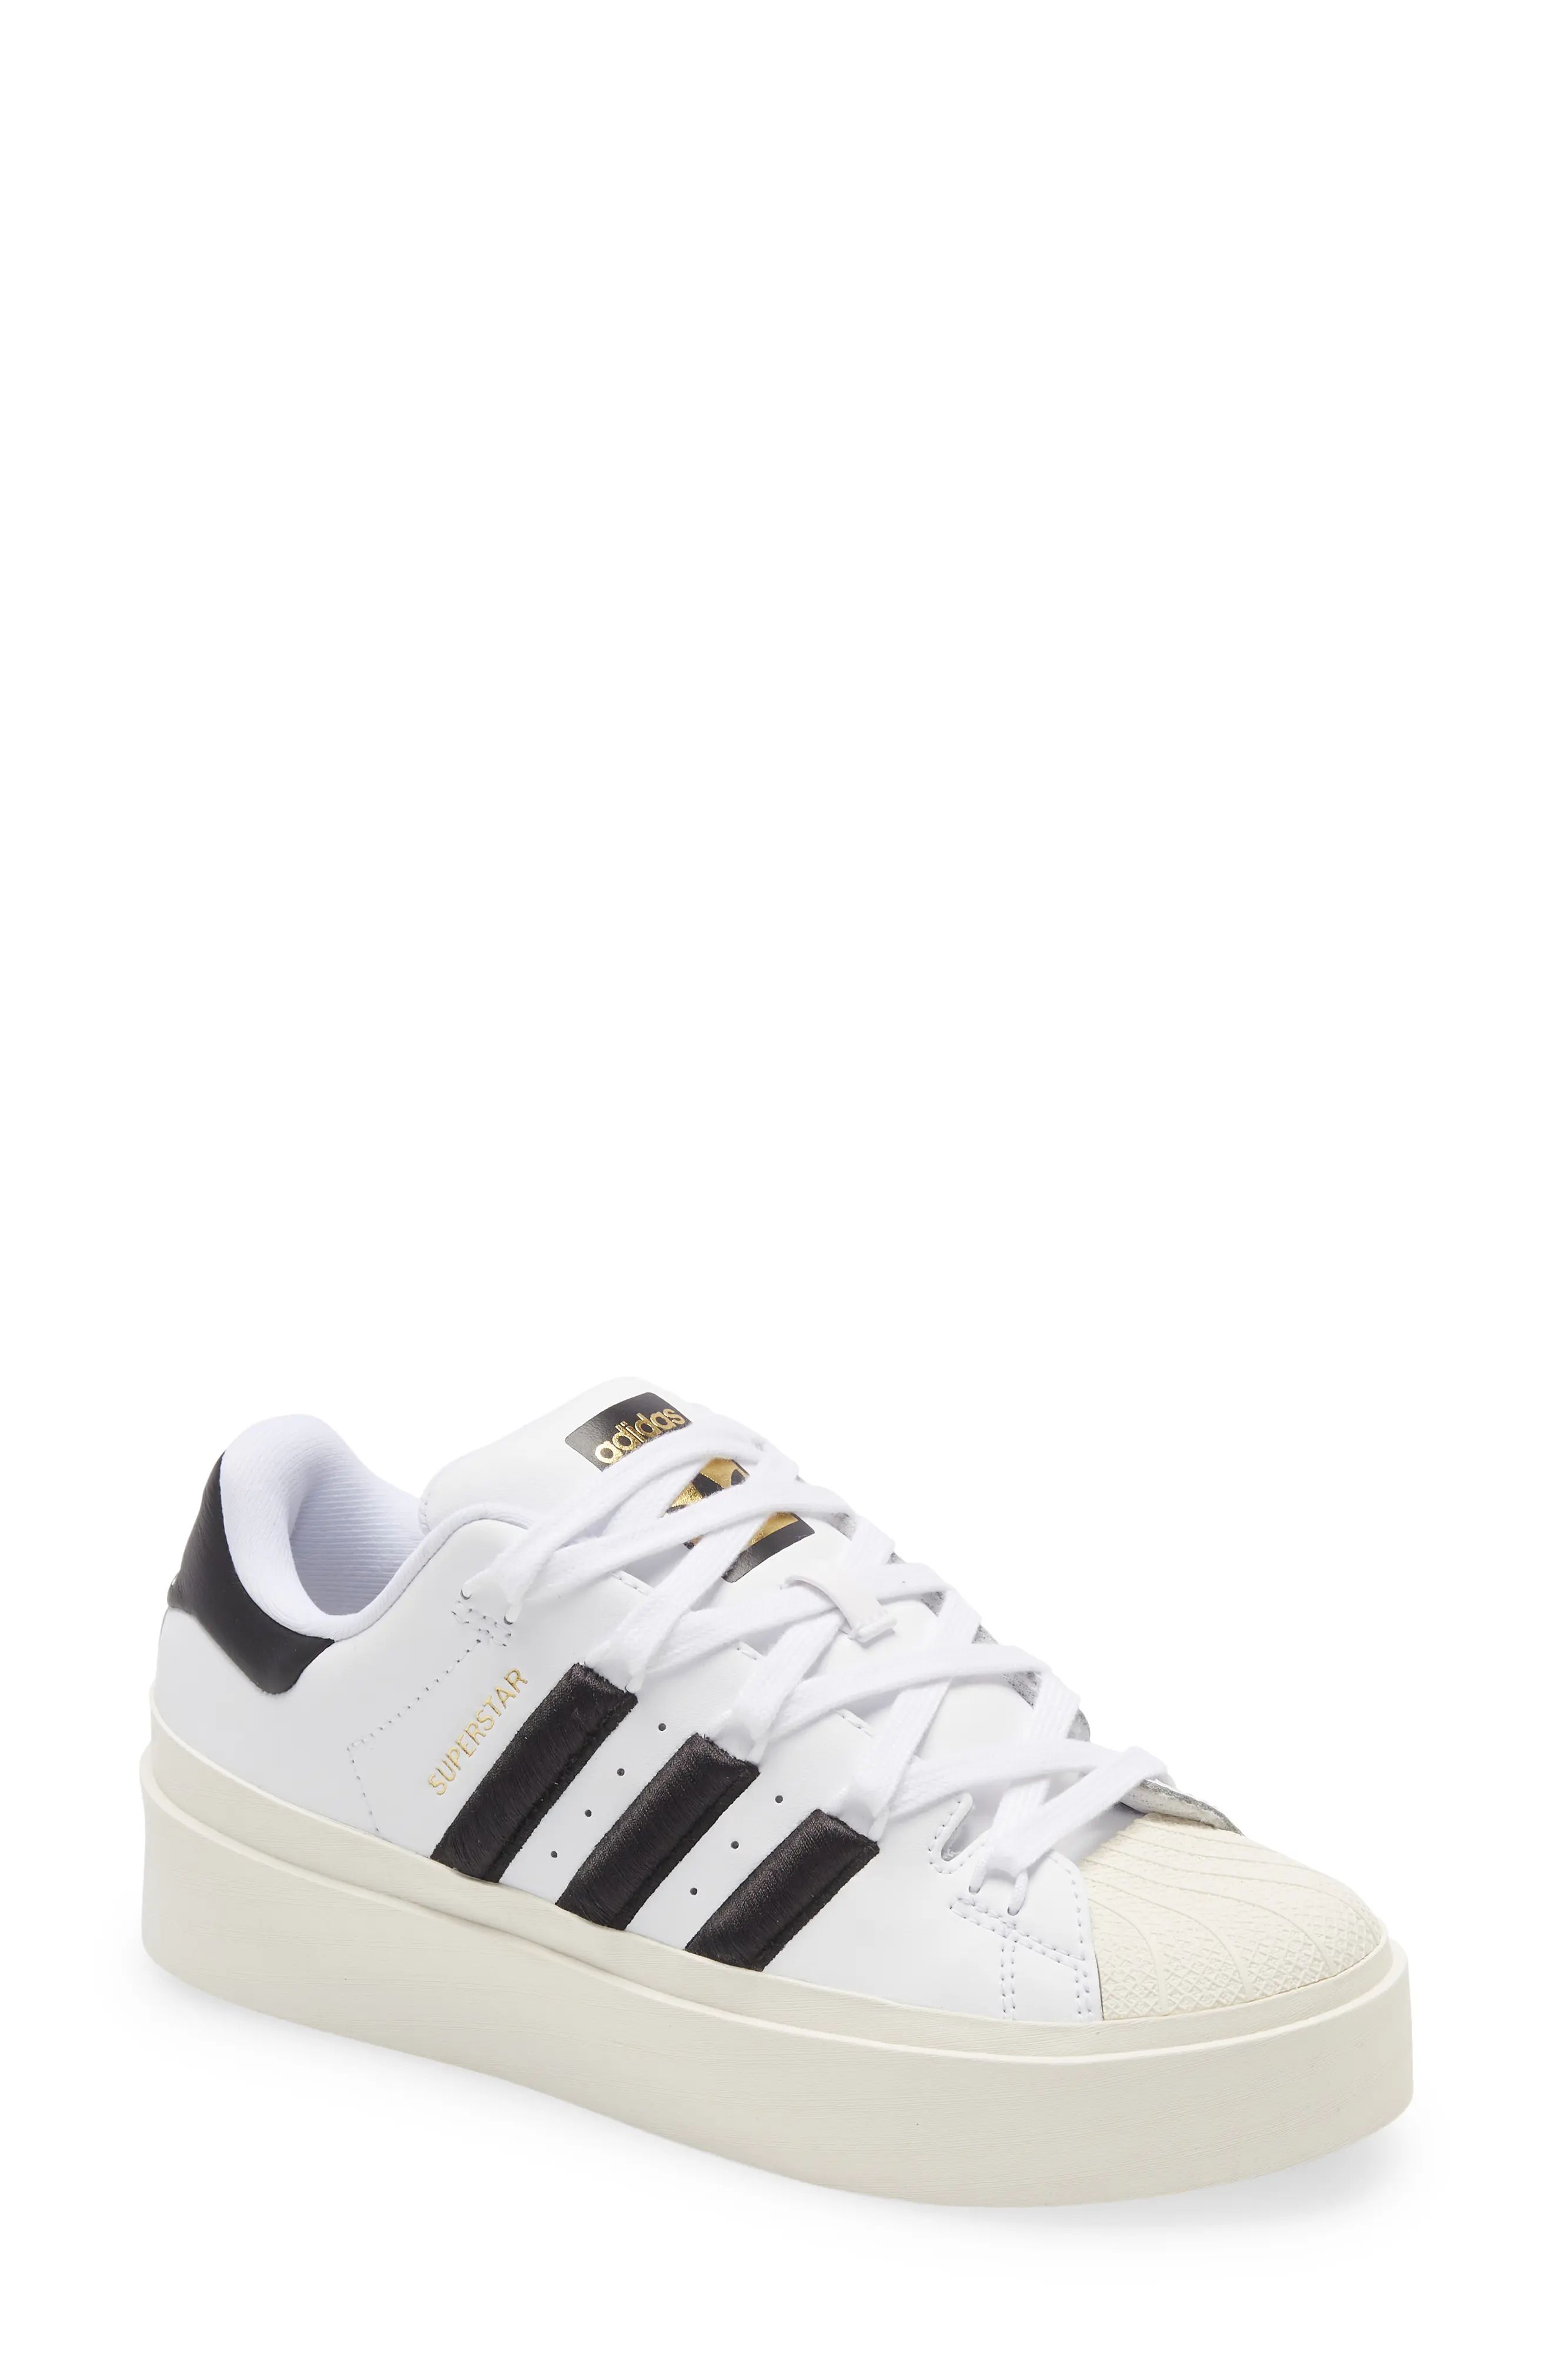 adidas Superstar Sneaker in White/Core Black/Off White at Nordstrom, Size 6 | Nordstrom